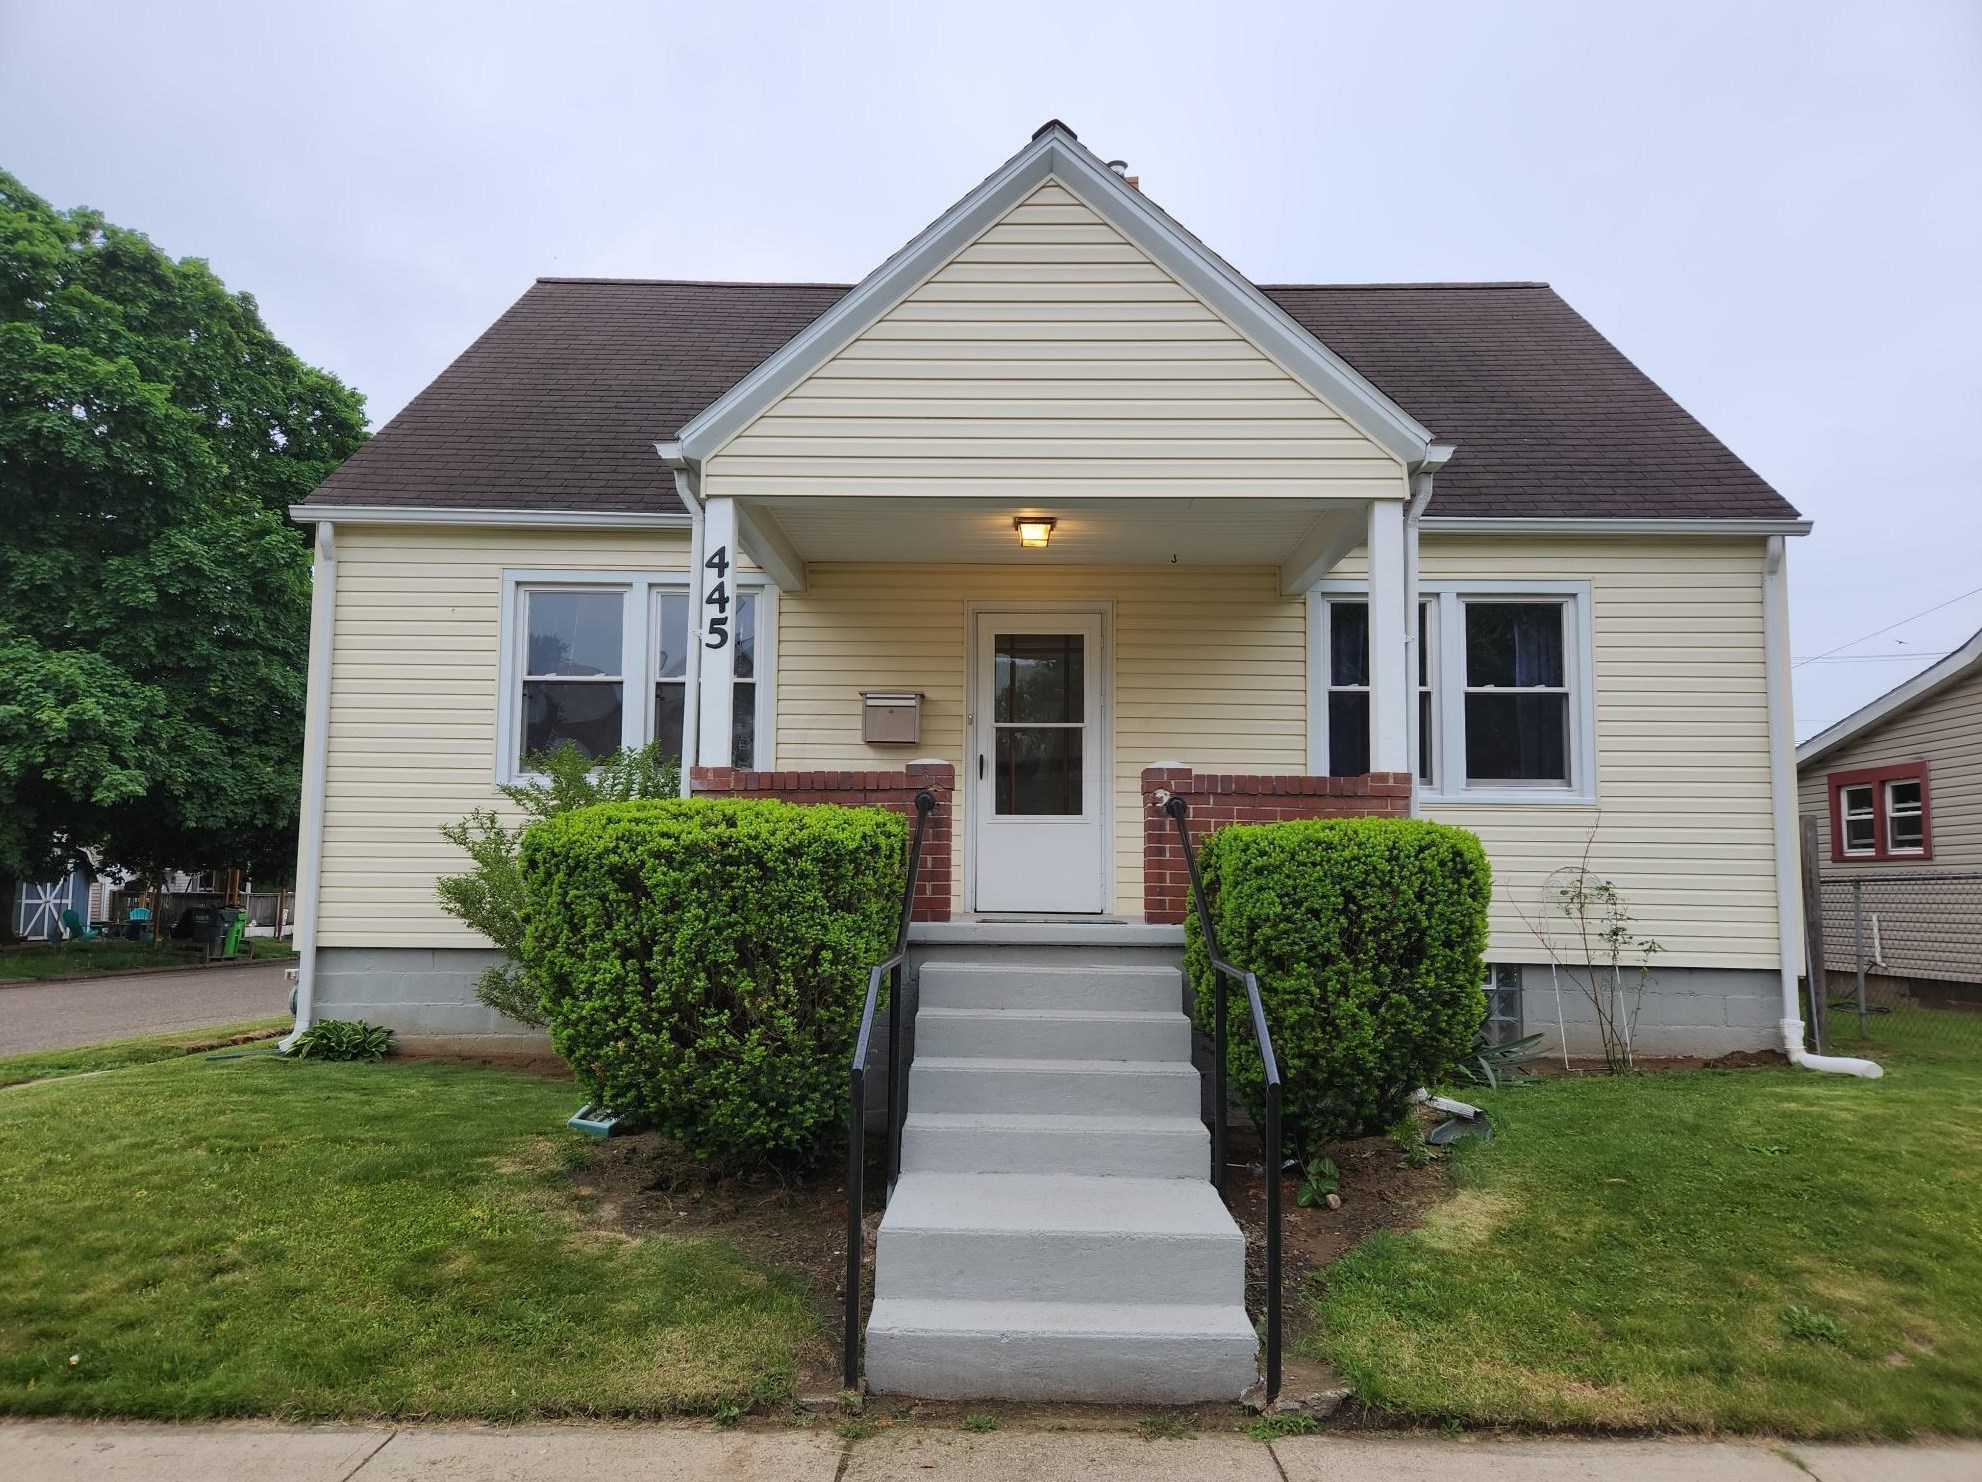 445 S 10th St, Coshocton, OH 43812